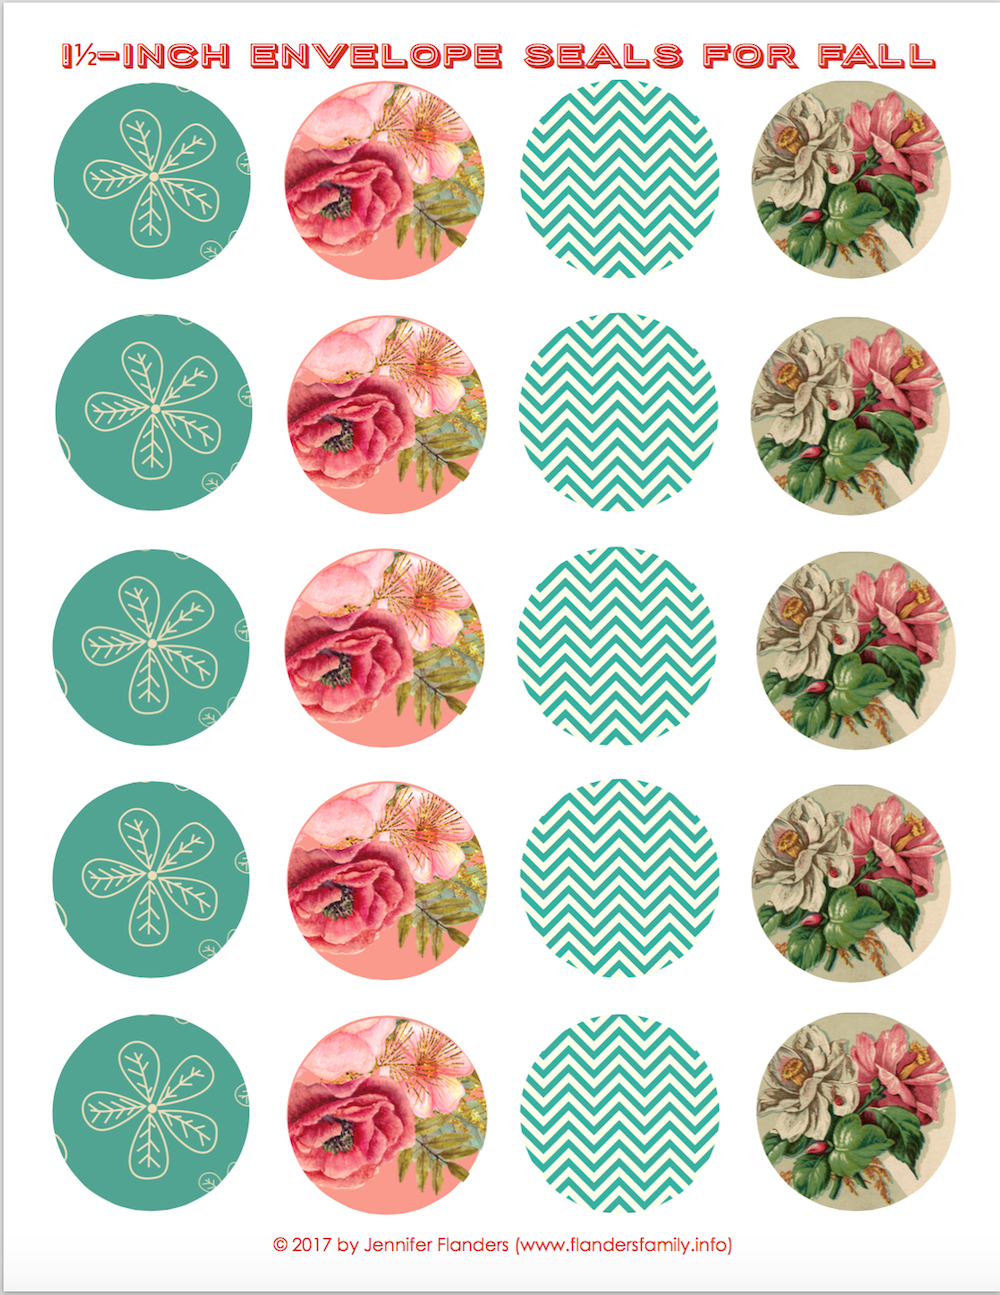 Beautiful! Free printable envelope seals (and coordinating cards) from www.flandersfamily.info